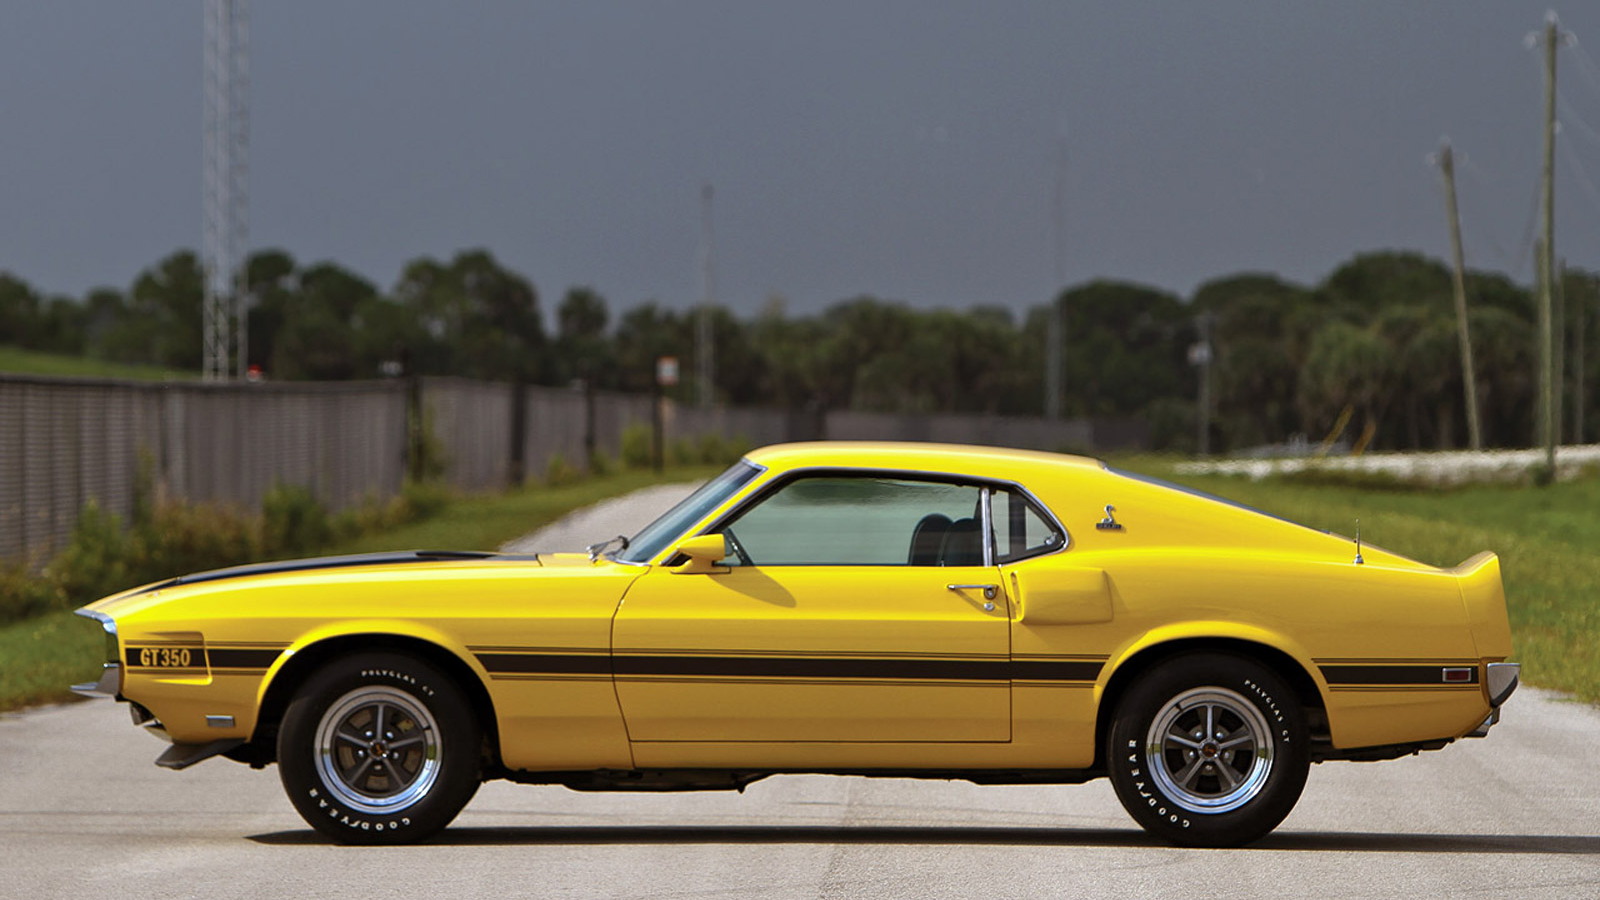 1970 Shelby GT350 - Image: RM Auctions